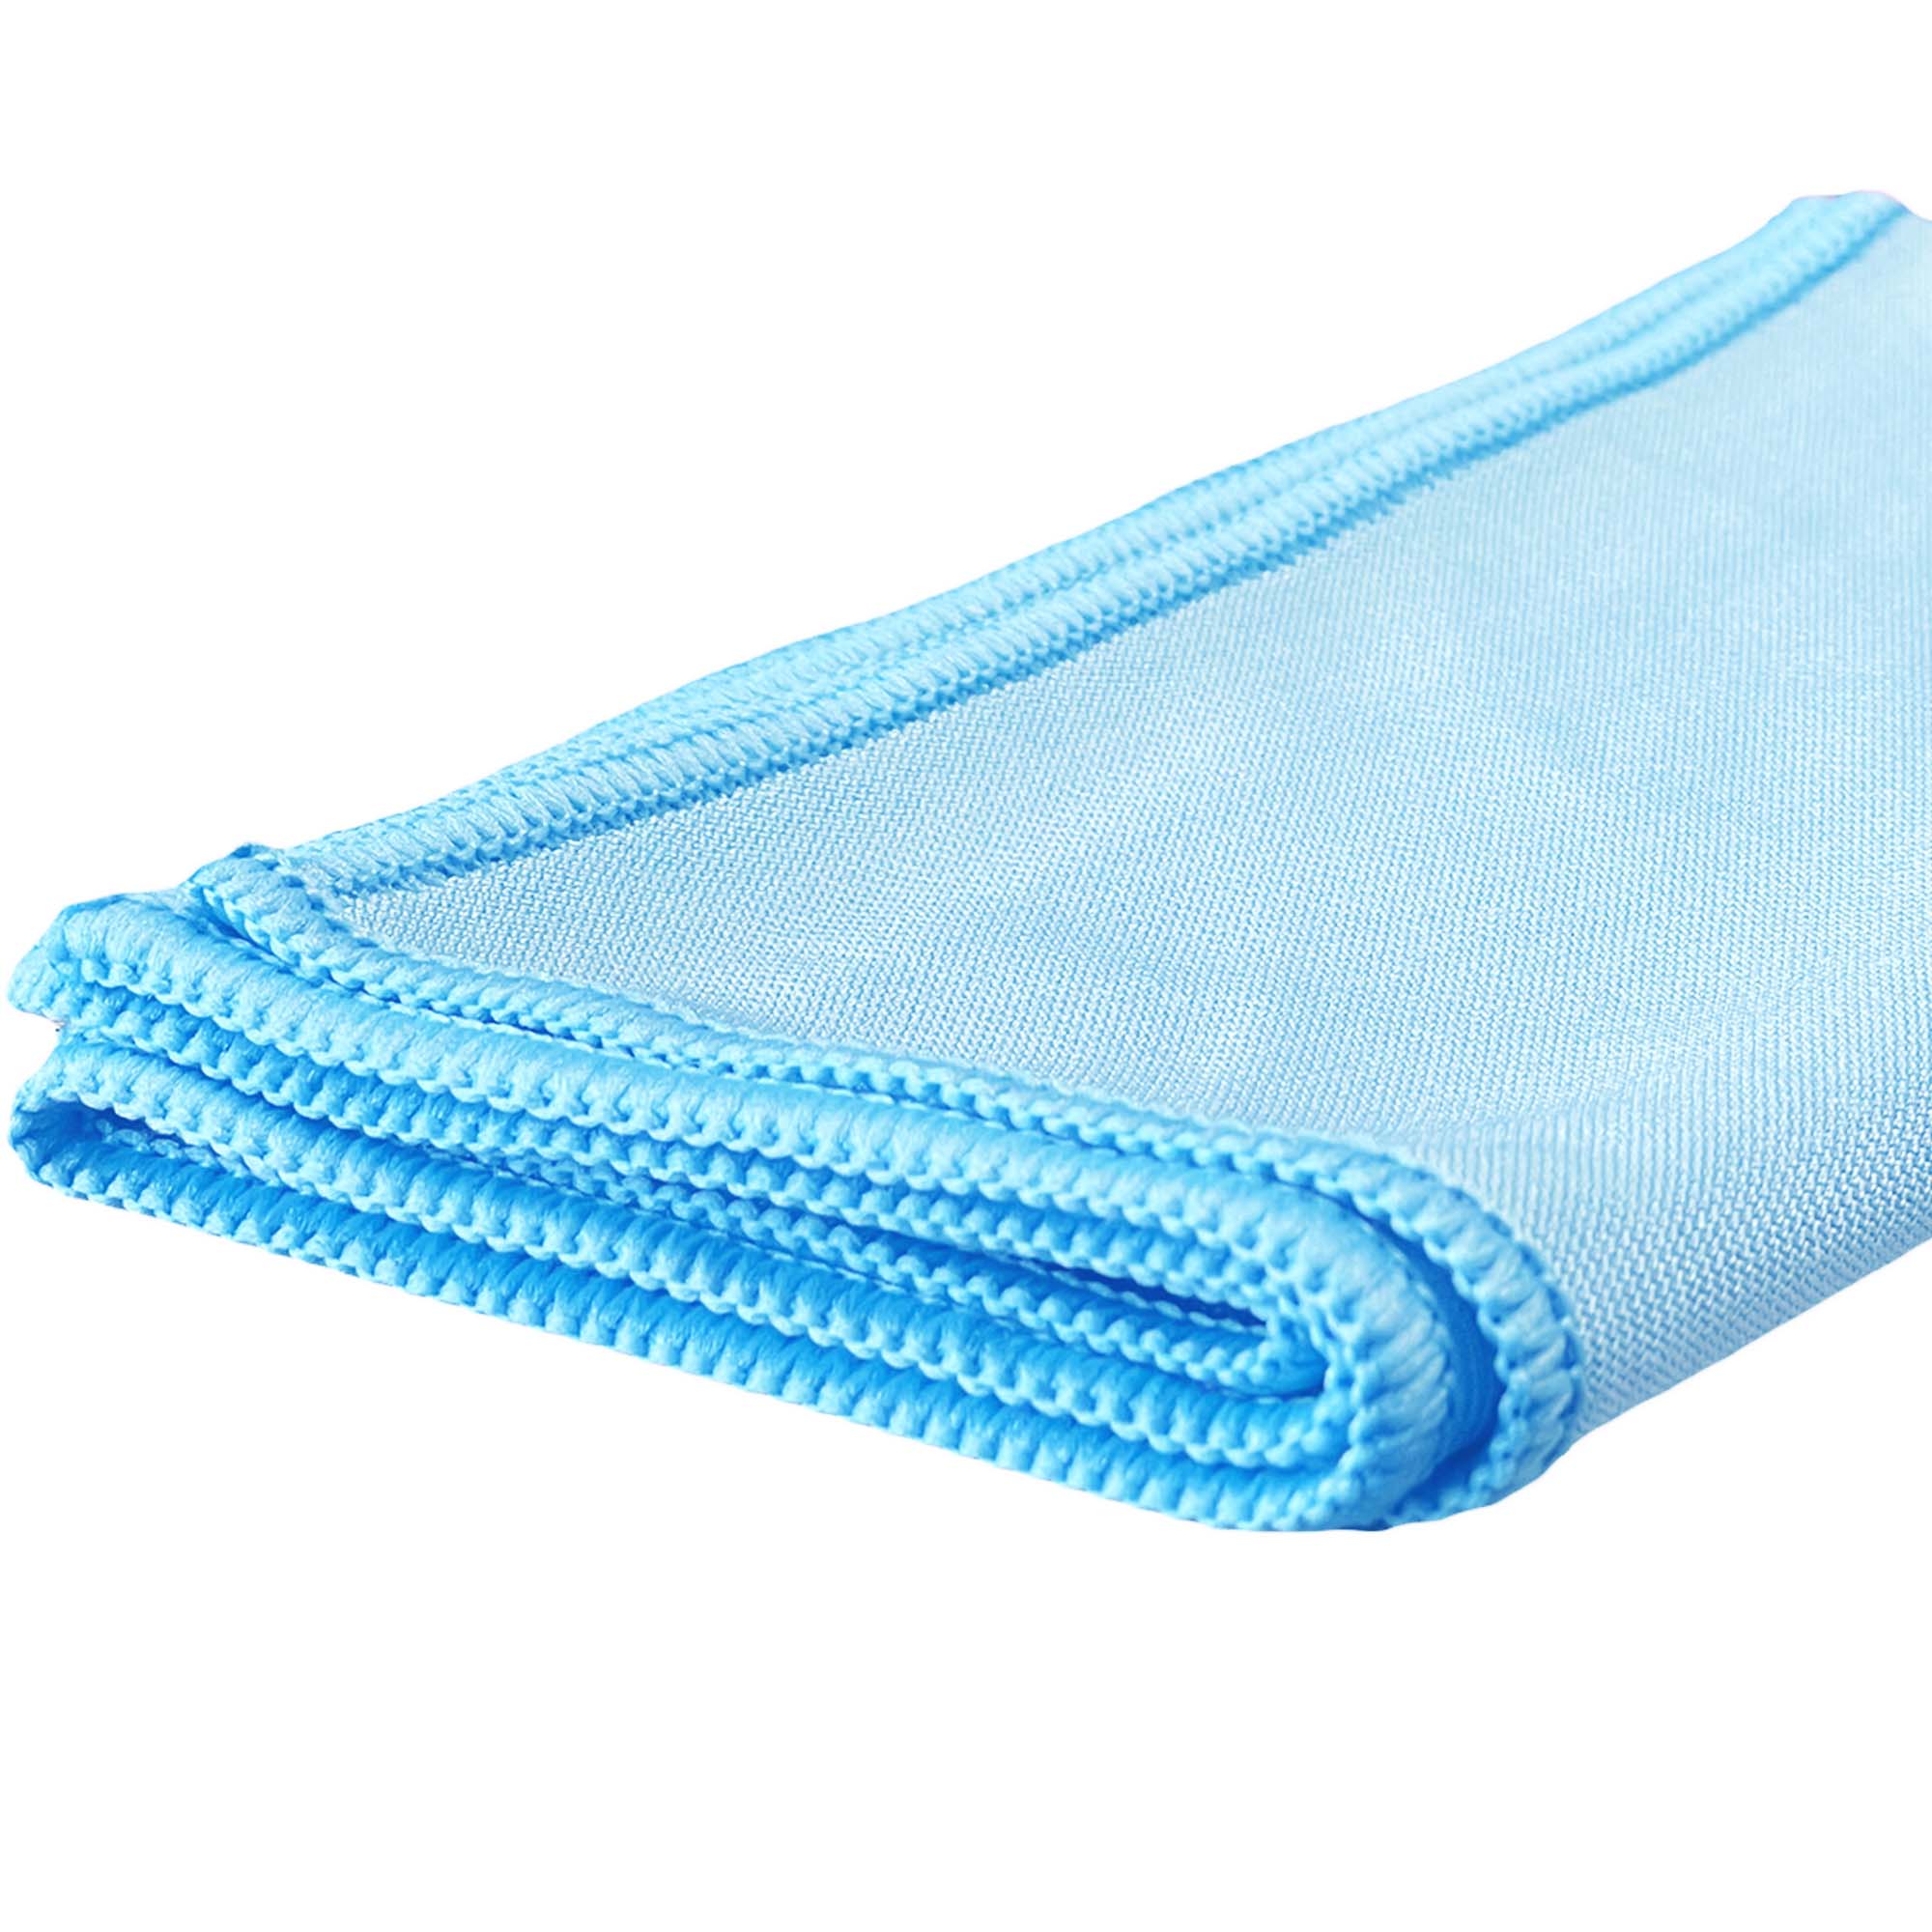 Wipe Once Microfiber Glass Cleaning Cloth Pro - 3 Pack